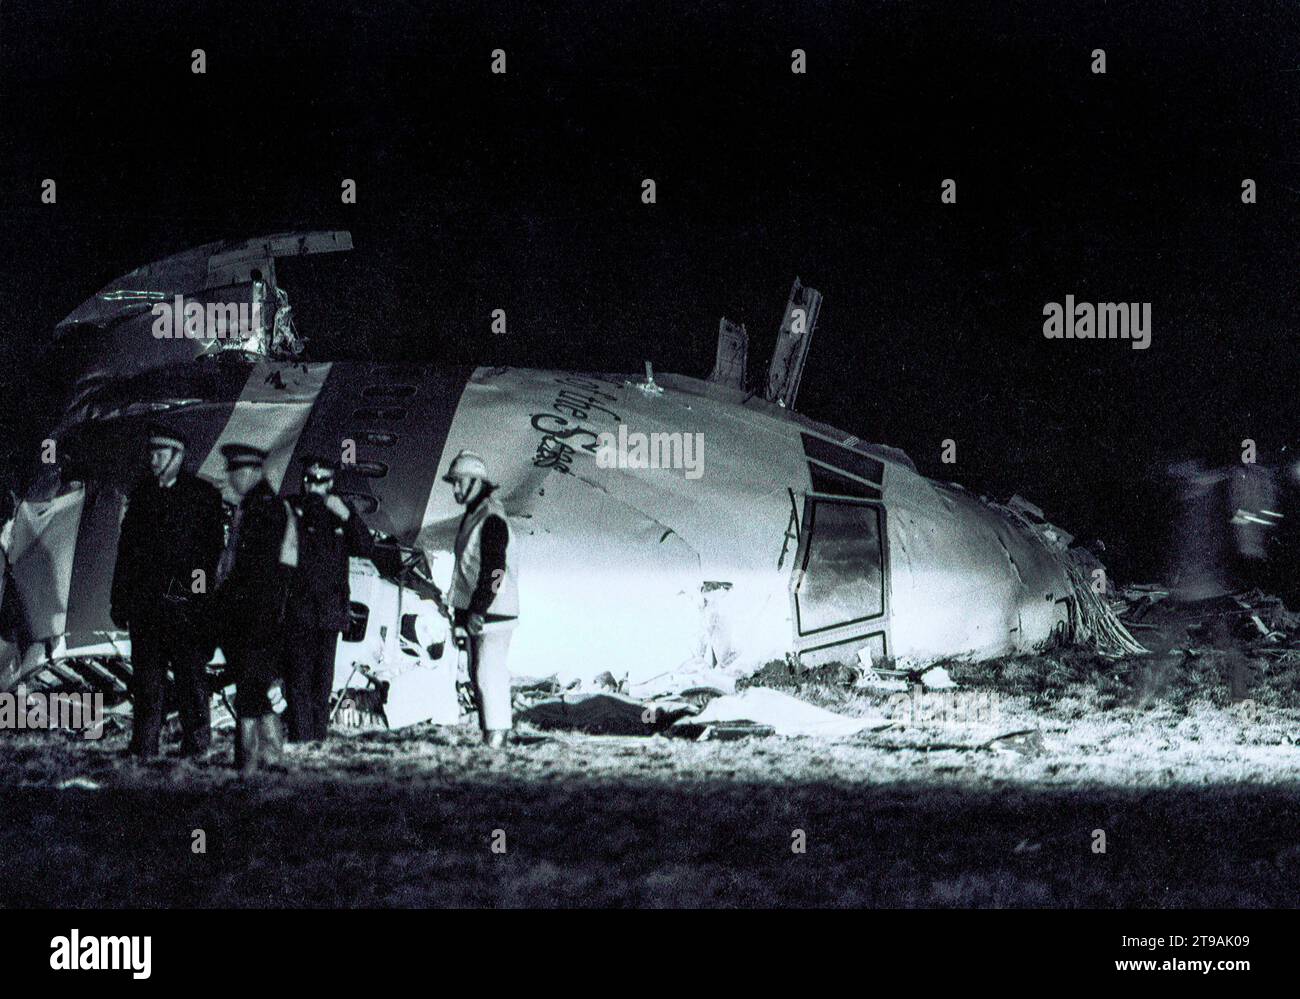 Lockerbie Distaster 1988 Pan Am Flight 103 21/12/88. Lockerbie disaster. Pan Am Flight 103. The remains of the forward section from Clipper Maid of the Seas on Tundergarth Hill, Lockerbie, Scotland. Pan Am flight 103, flight of a passenger airliner operated by Pan American World Airways Pan Am that exploded over Lockerbie, Scotland, on December 21, 1988, after a bomb was detonated. All 259 people on board were killed, and 11 individuals on the ground also died. Picture Ian Rutherford Ian Rutherford Lockerbie Thundergarth Mains Dumfries & Galloway Scotland Copyright: xIanxRutherfordx Lockerbie Stock Photo